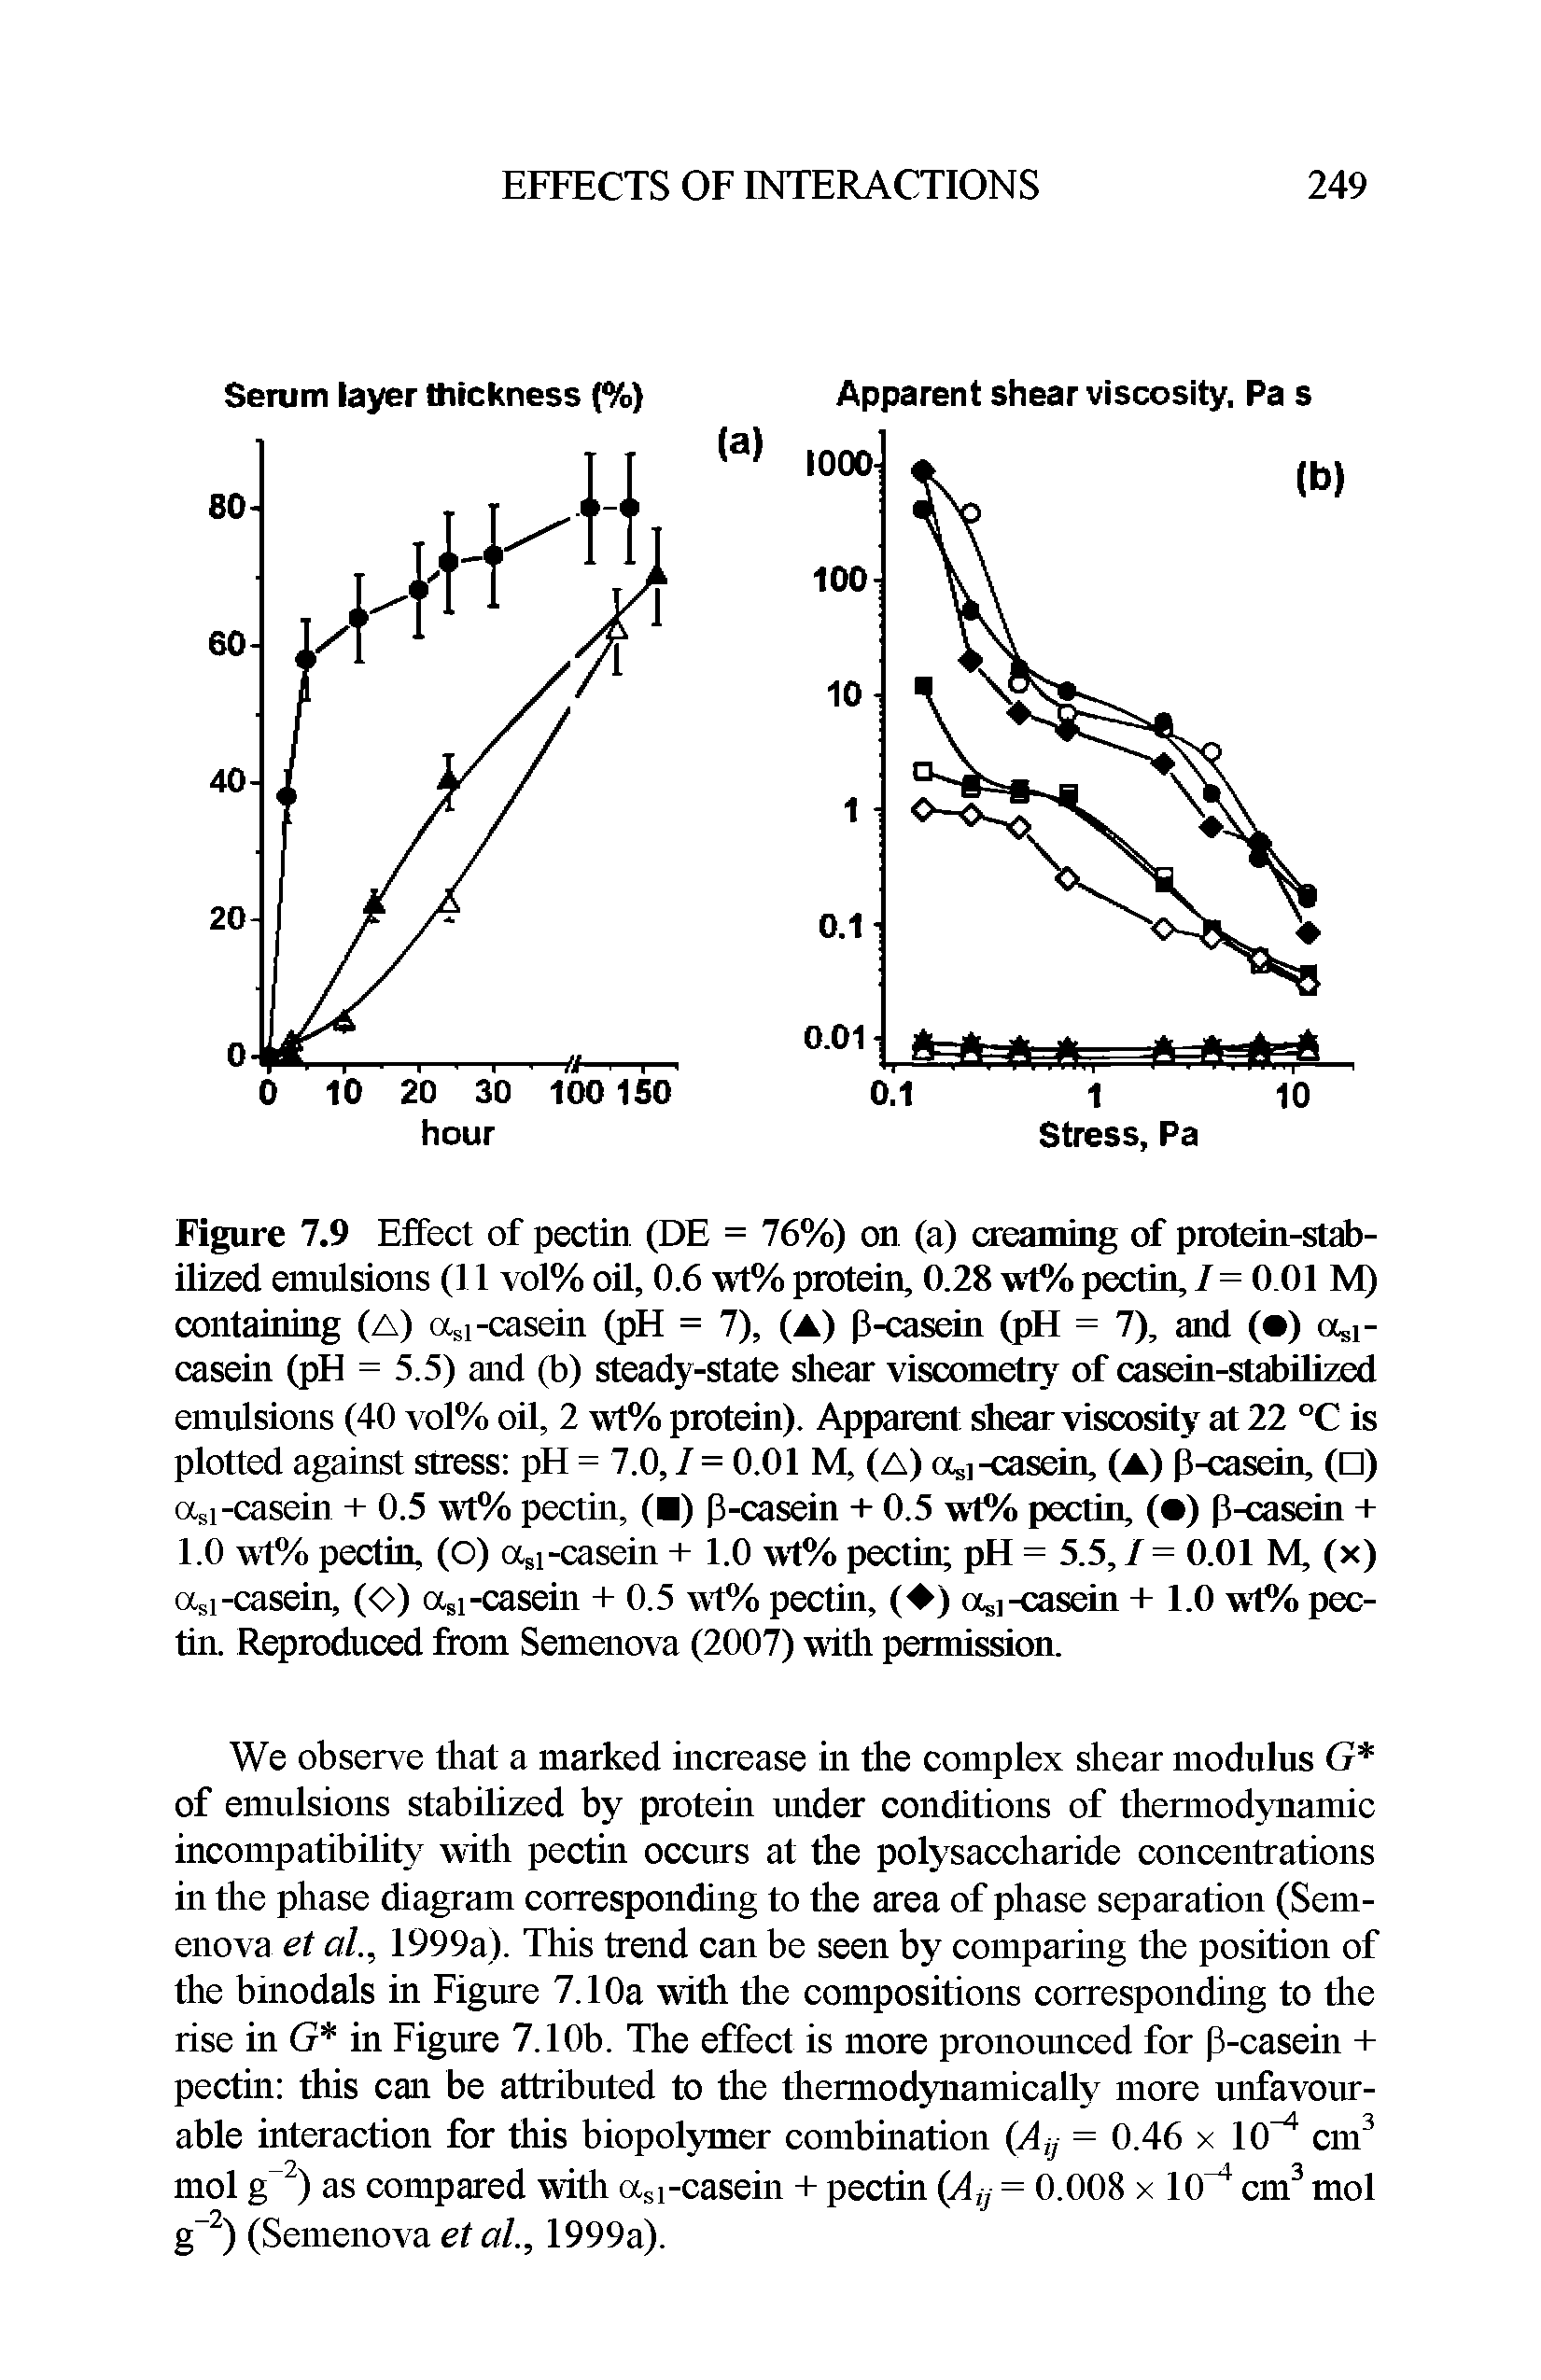 Figure 7.9 Effect of pectin (DE = 76%) on (a) creaming of protein-stabilized emulsions (11 vol% oil, 0.6 wt% protein, 0.28 wt% pectin, I = 0.01 M) containing (A) asi-casein (pH = 7), (A) p-casein (pH = 7), and ( ) o i-casein (pH = 5.5) and (b) steady-state shear viscometry of casein-stabilized emulsions (40 vol% oil, 2 vt% protein). Apparent shear viscosity at 22 °C is plotted against stress pH = 7.0, / = 0.01 M, (A) -casein, (A) p-casein, ( ) ocsi -casein + 0.5 wt% pectin, ( ) p-casein + 0.5 wt% pectin, ( ) p-casein + 1.0 wt% pectin, (O) as[-casein + 1.0 wt% pectin pH = 5.5,1 = 0.01 M, (x) ocsi -casein, (O) as[-casein + 0.5 wt% pectin, ( ) oc -casein + 1.0 wt% pectin. Reproduced from Semenova (2007) with permission.